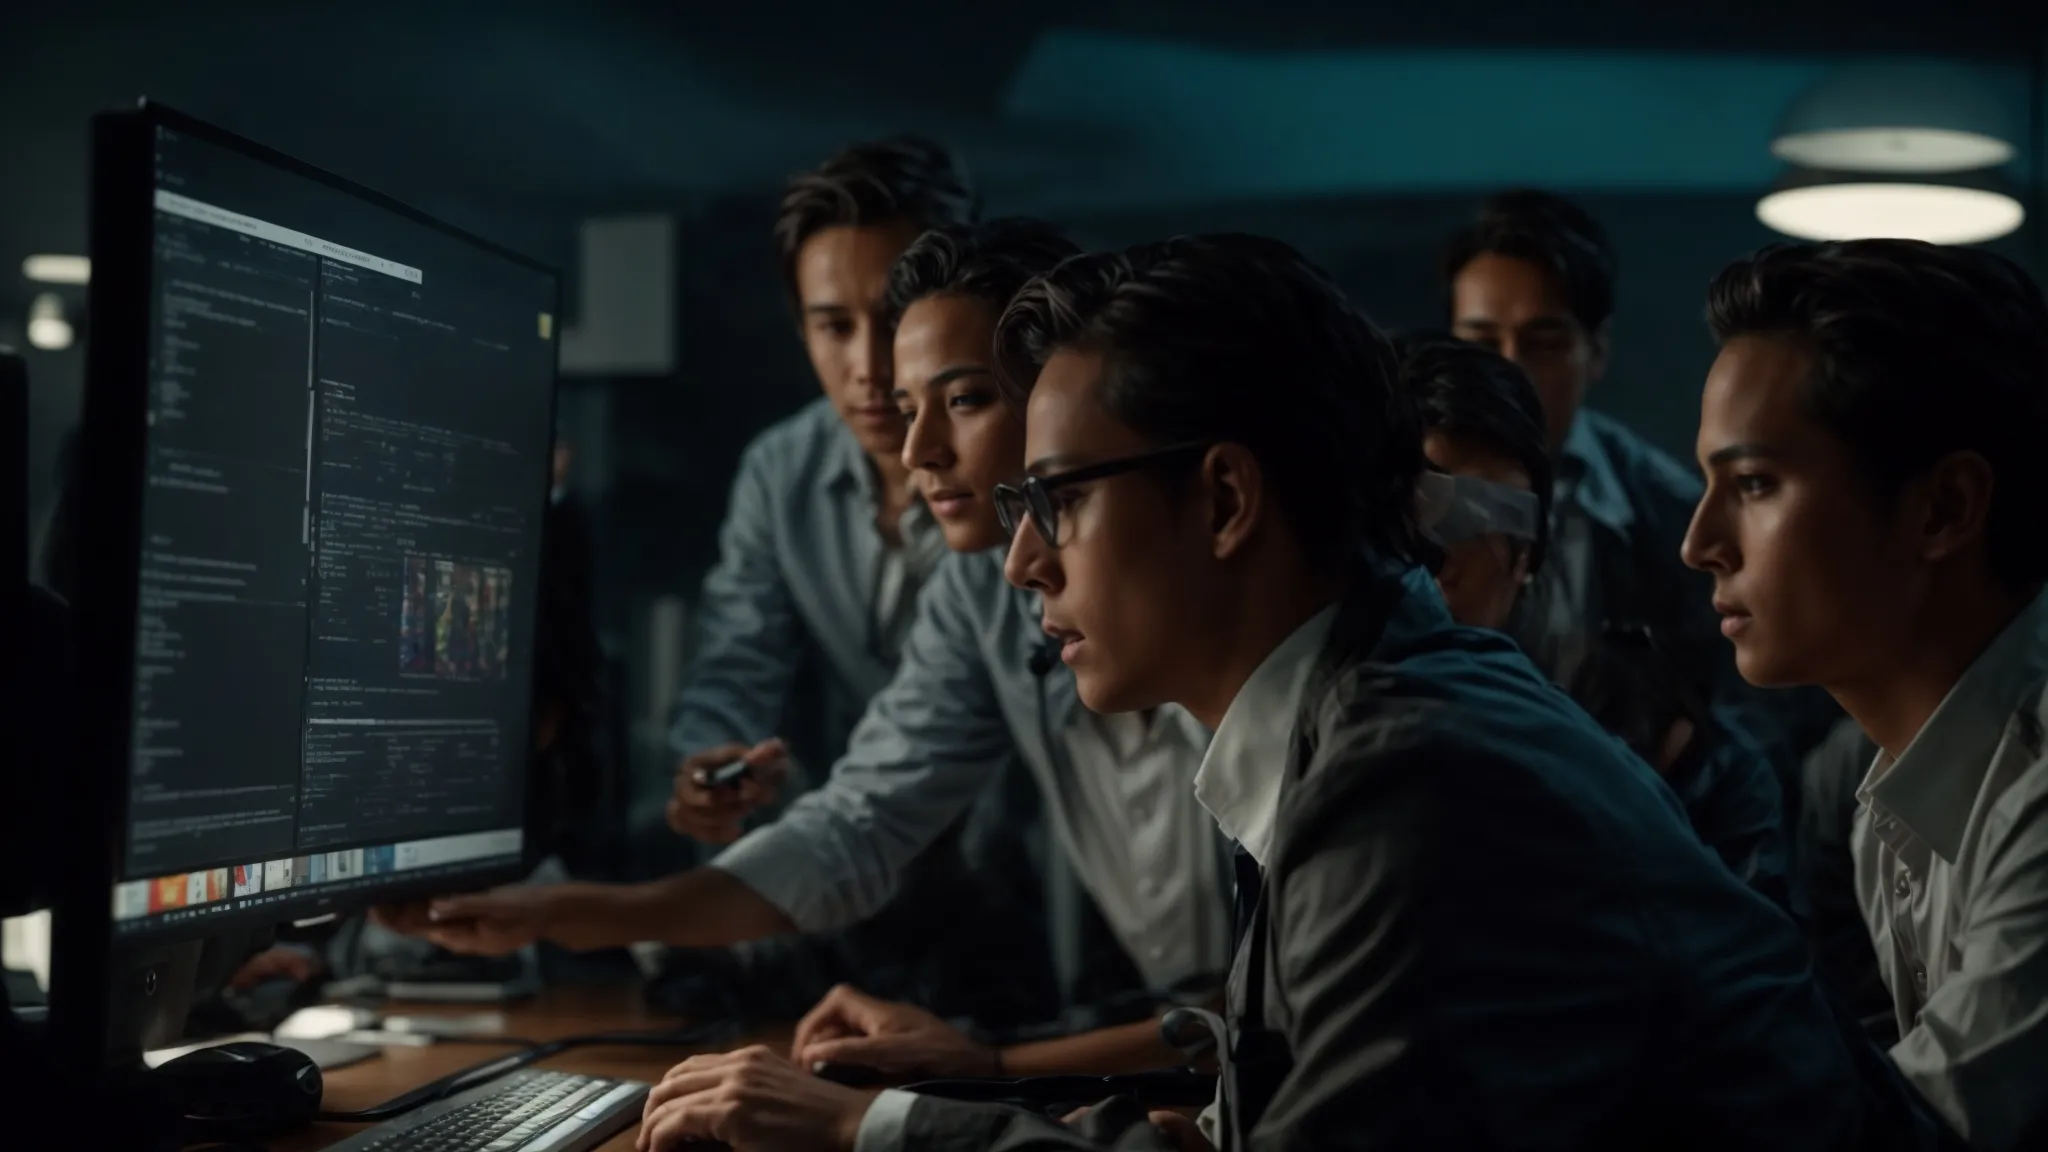 a group of professionals gathered around a computer, discussing strategies shown on the screen.